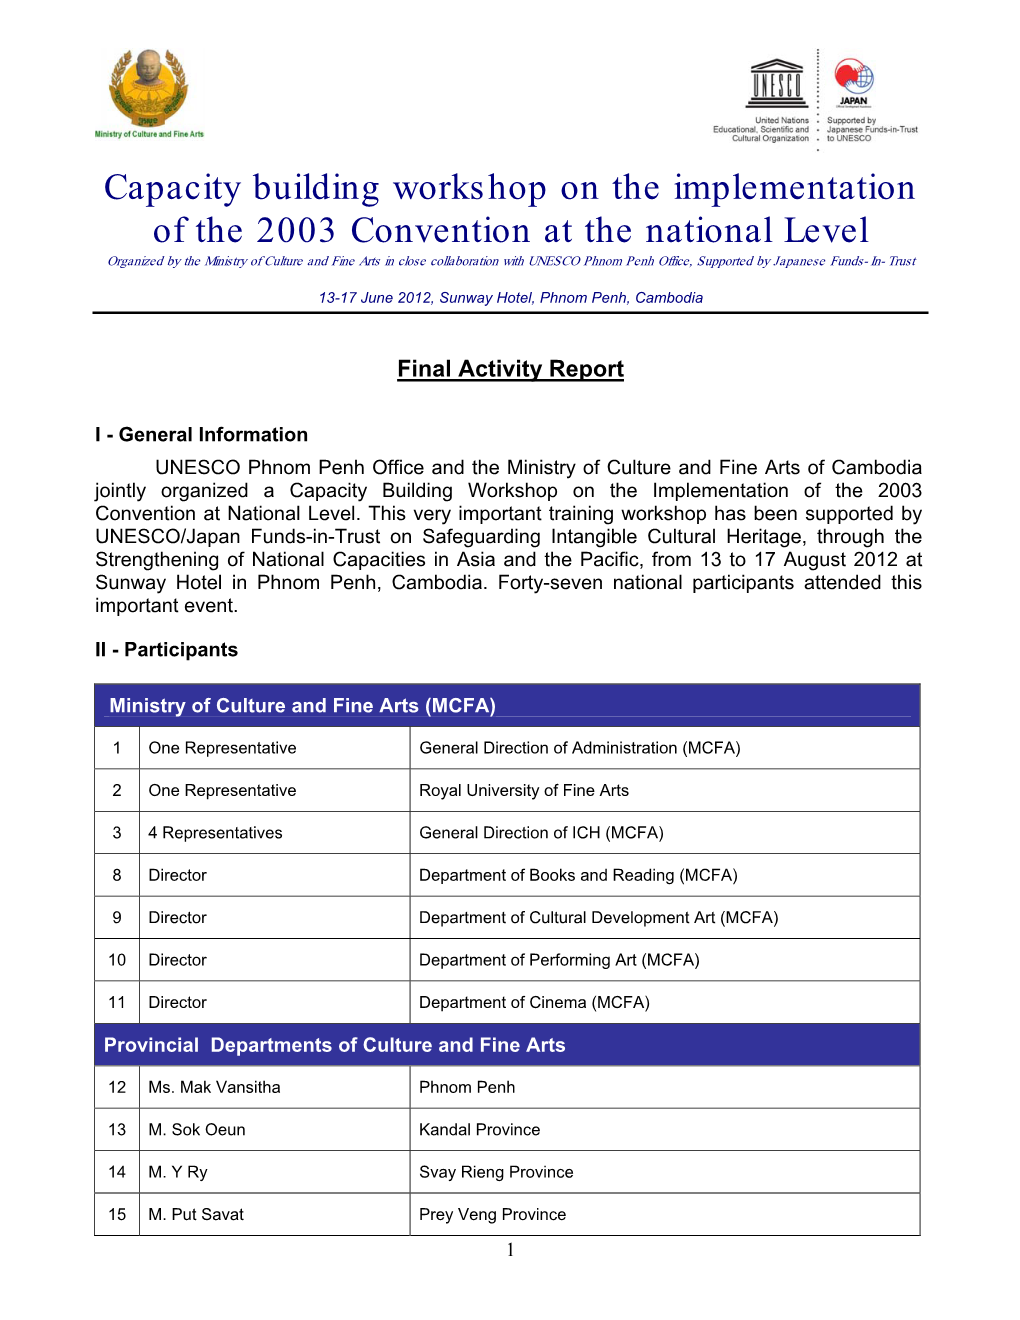 Capacity Building Workshop on the Implementation of the 2003